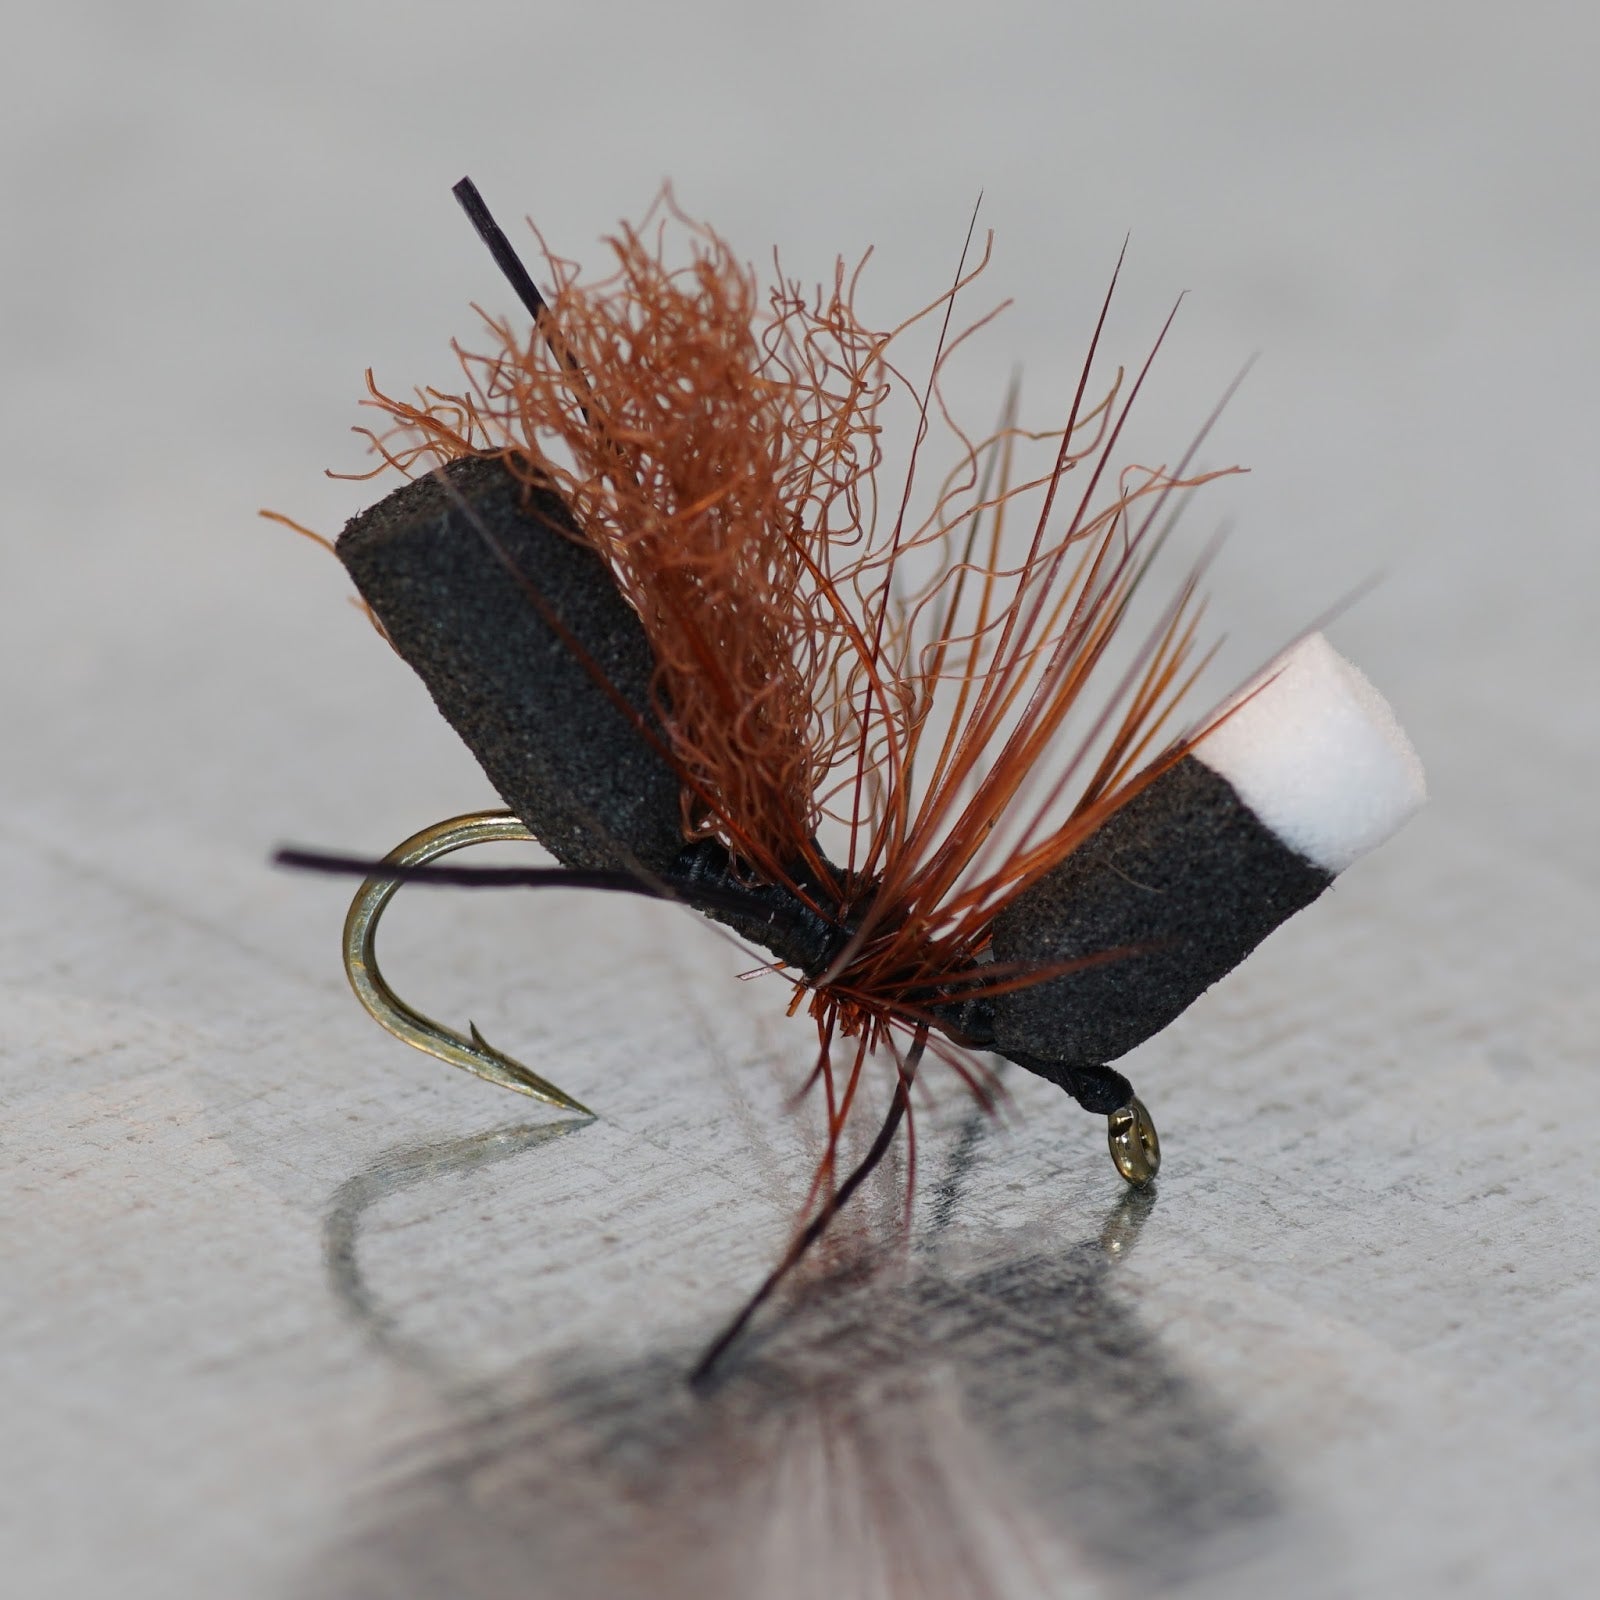 Elite Saltwater Fly Series The Black and Tan - Fly Fishing Gear